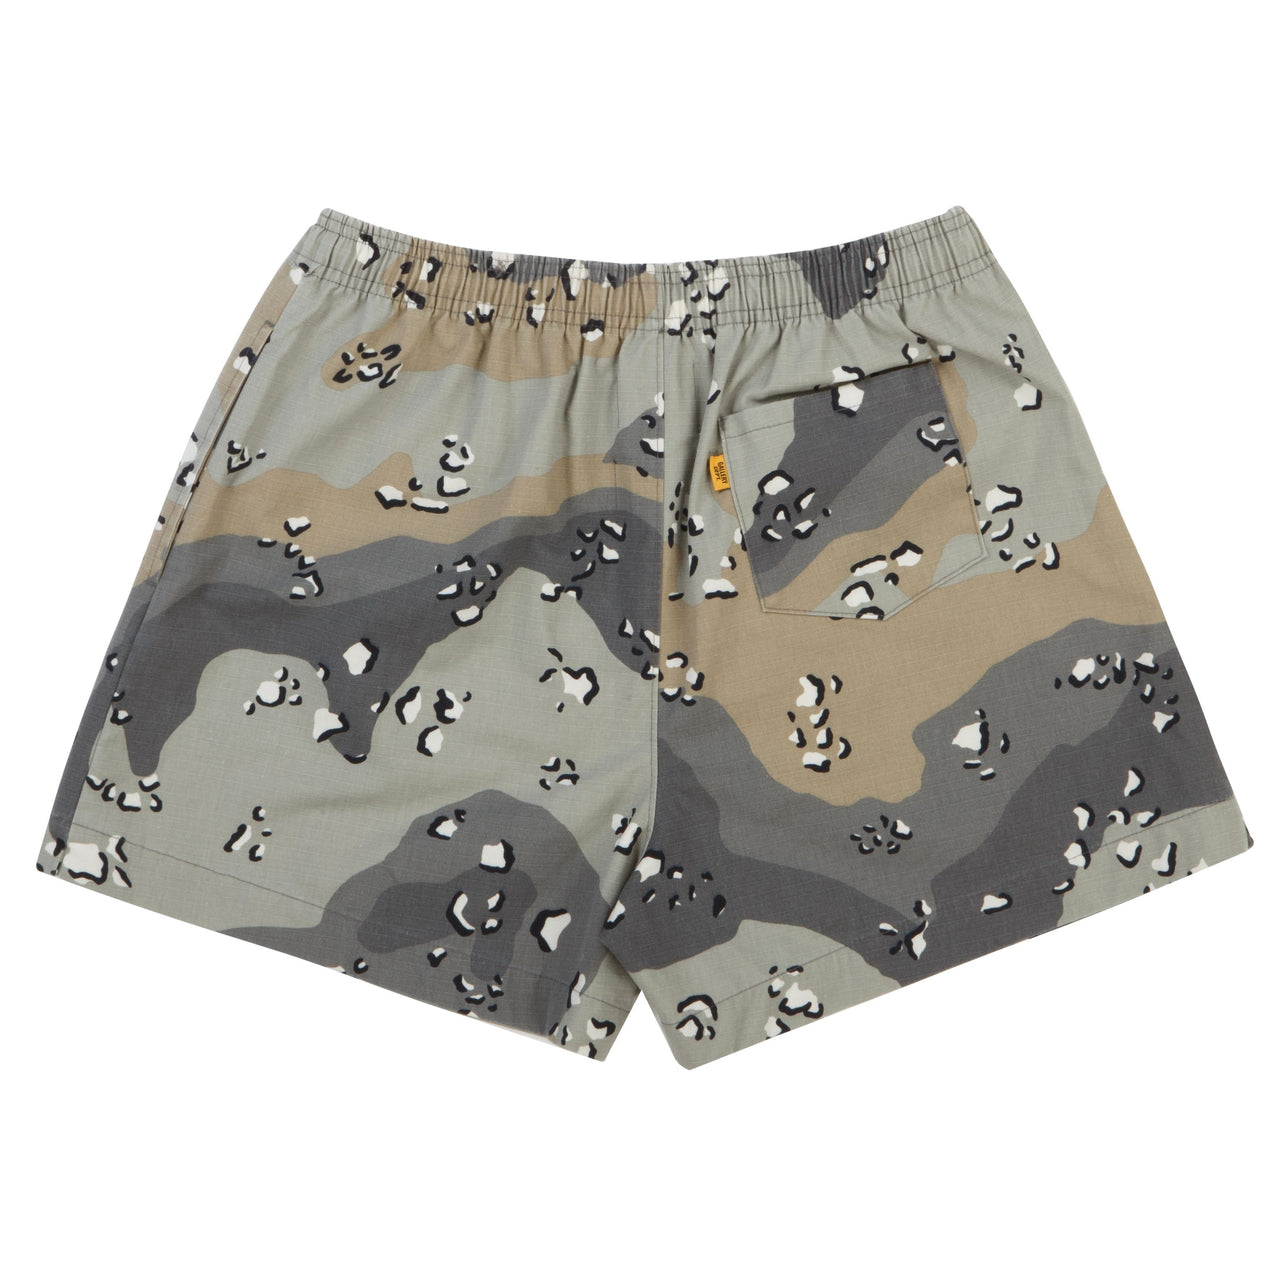 Gallery Dept. Zuma Shorts Grey Storm Camo (In-store Exclusive)